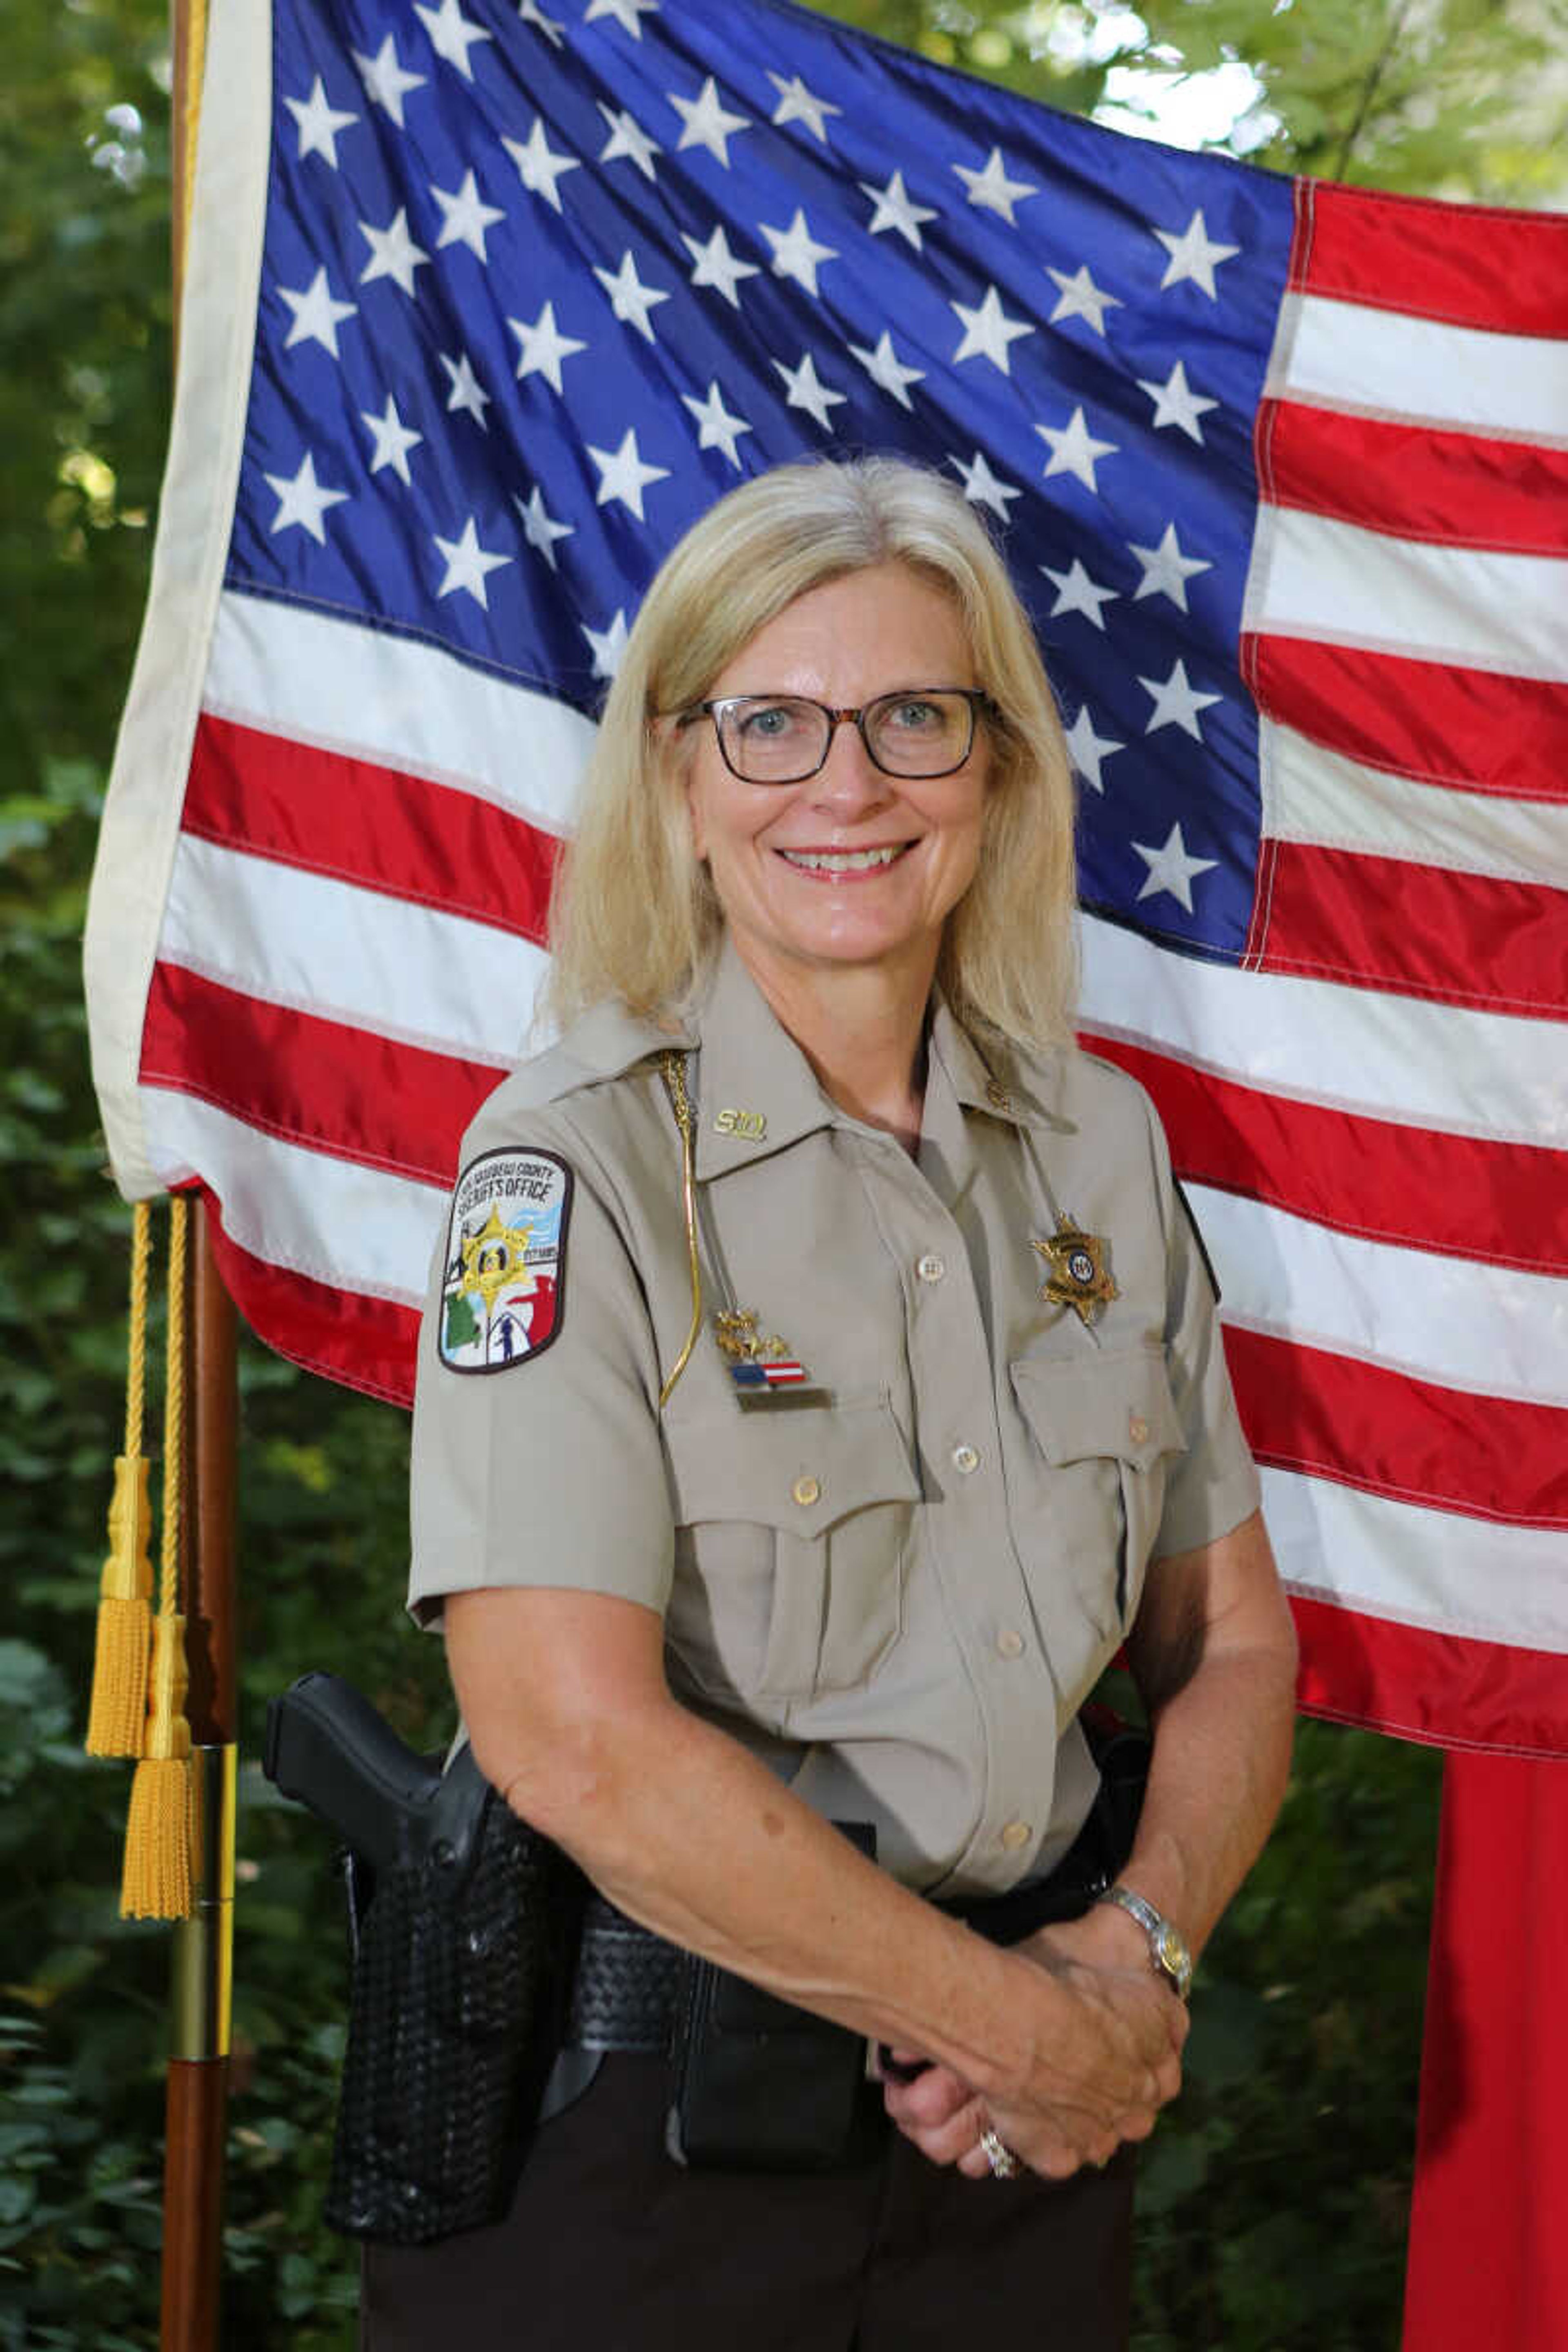 Interim sheriff Ruth Ann Dickerson is running unopposed for the upcoming Nov. 6 election. She took over as interim after her predecessor John Jordan resigned. Dickerson will be the first female sheriff for Cape Girardeau County.